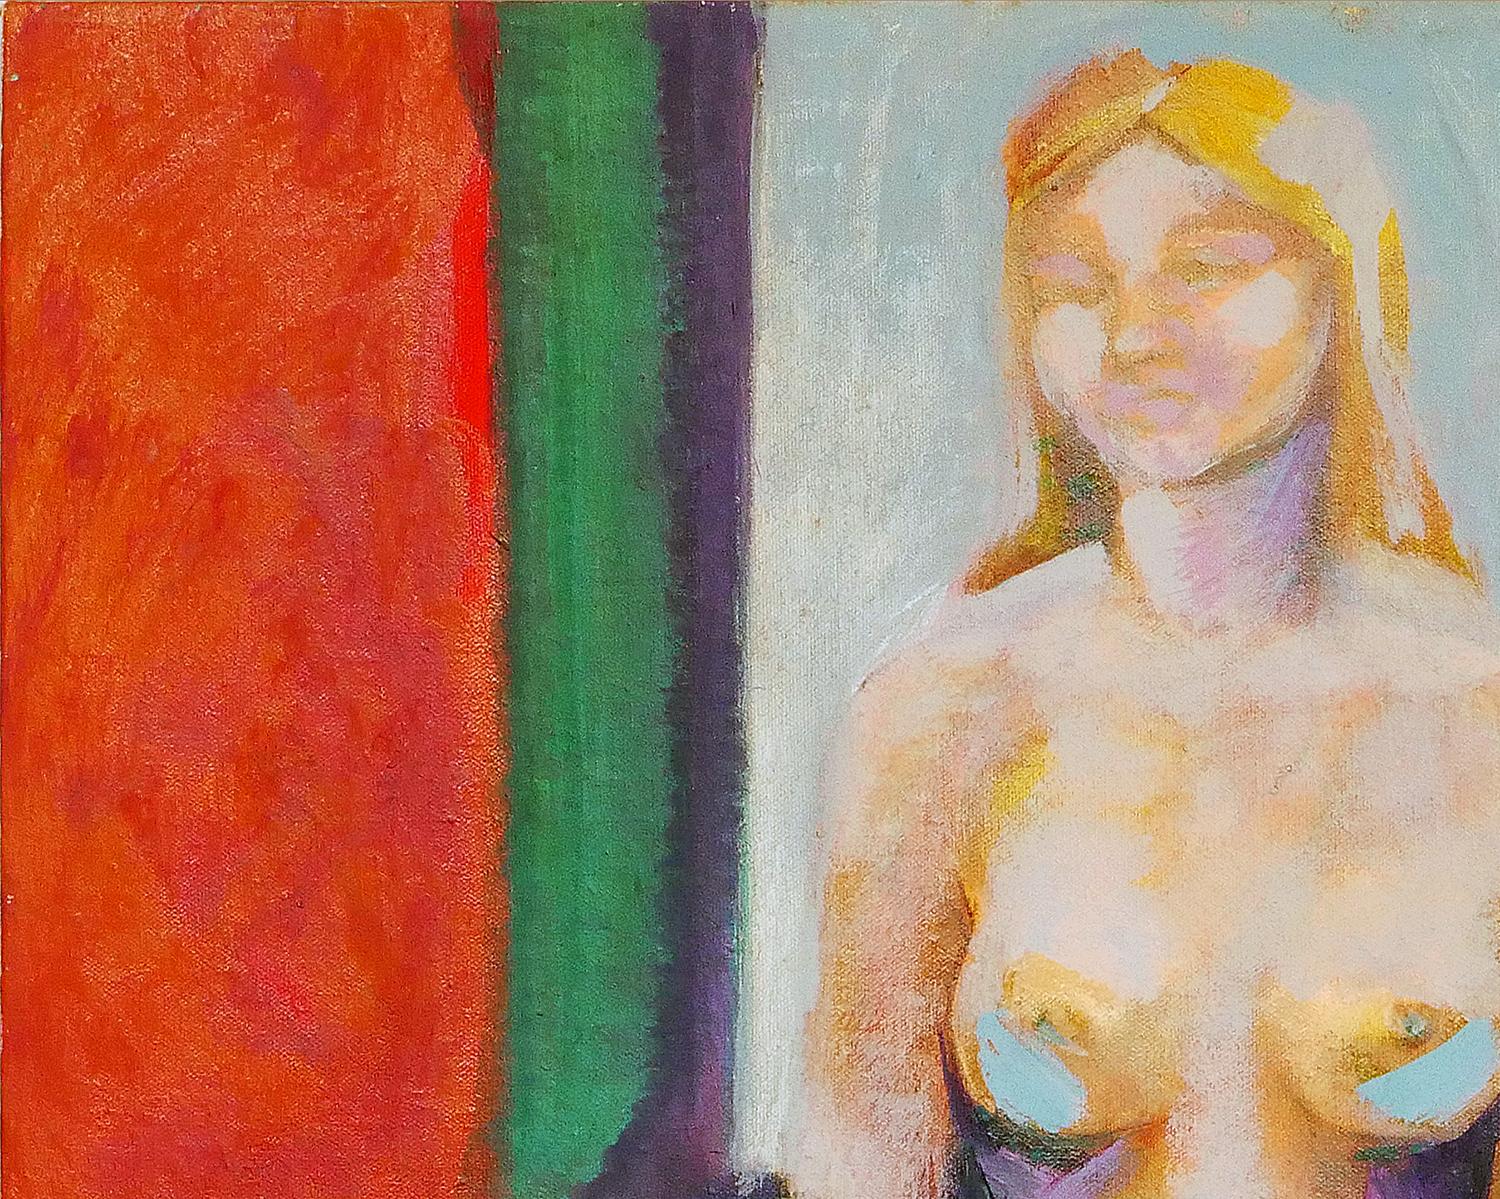 Modern abstract figurative painting by Houston, TX artist Margaret Nobler. The work features a central seated female nude set against a bold red and green background. Currently unframed, but options are available. 

Artist Biography: Margaret Nobler